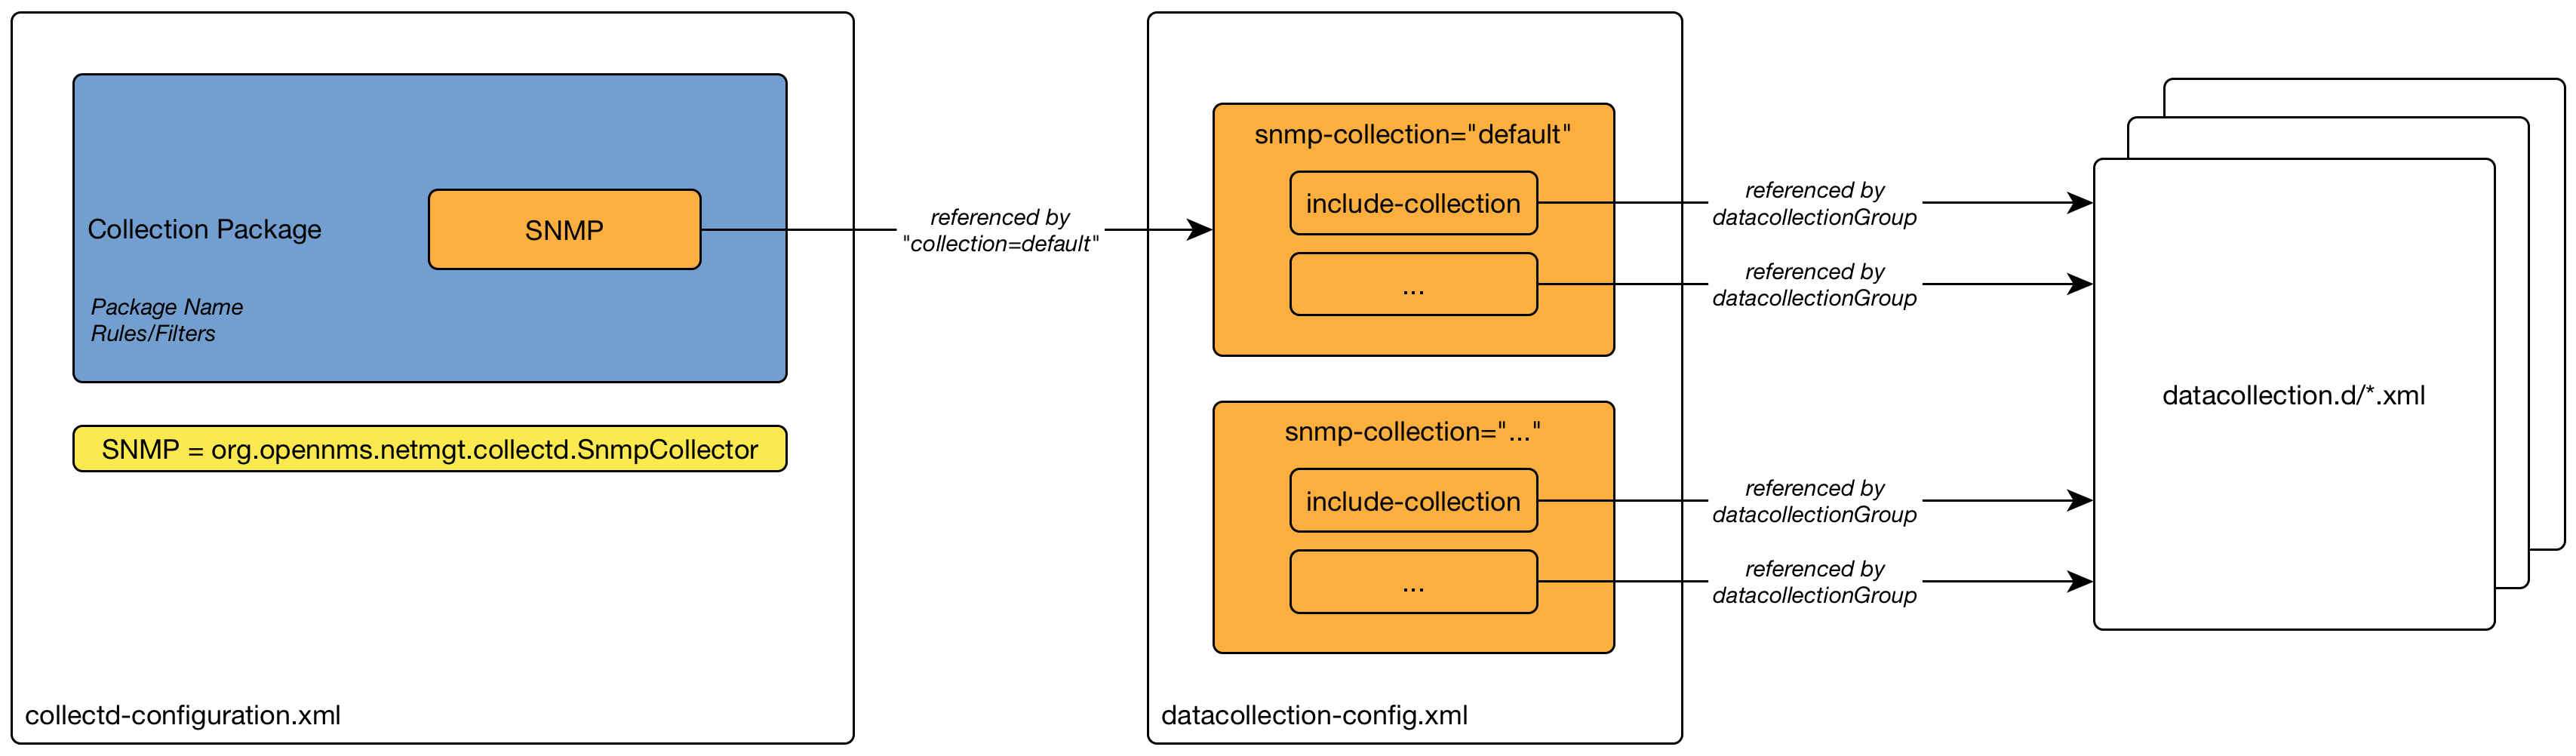 01 snmp datacollection configuration